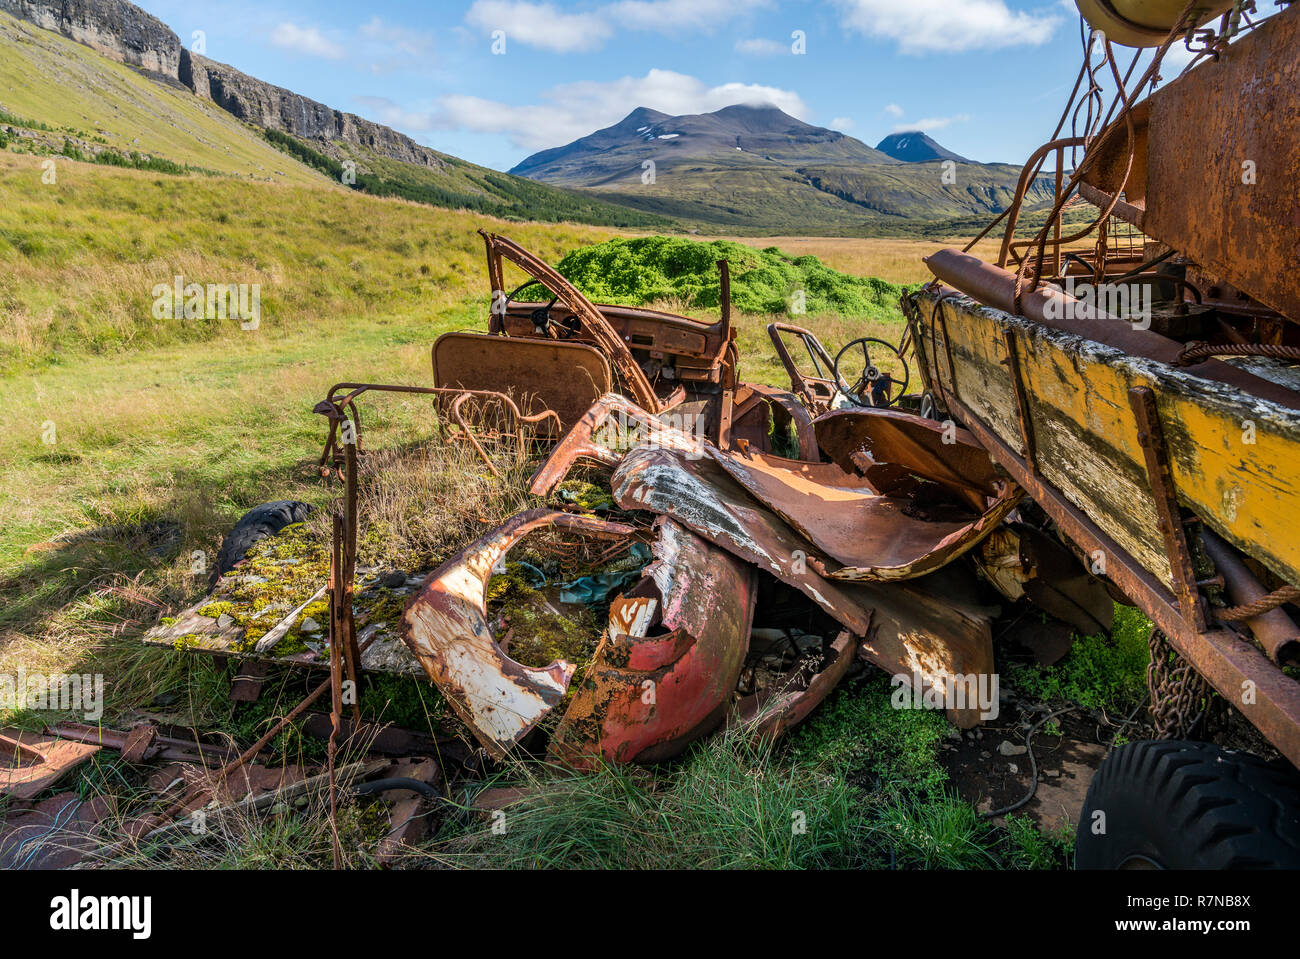 Old rusted vehicles, Hvalfjordur, Iceland Stock Photo